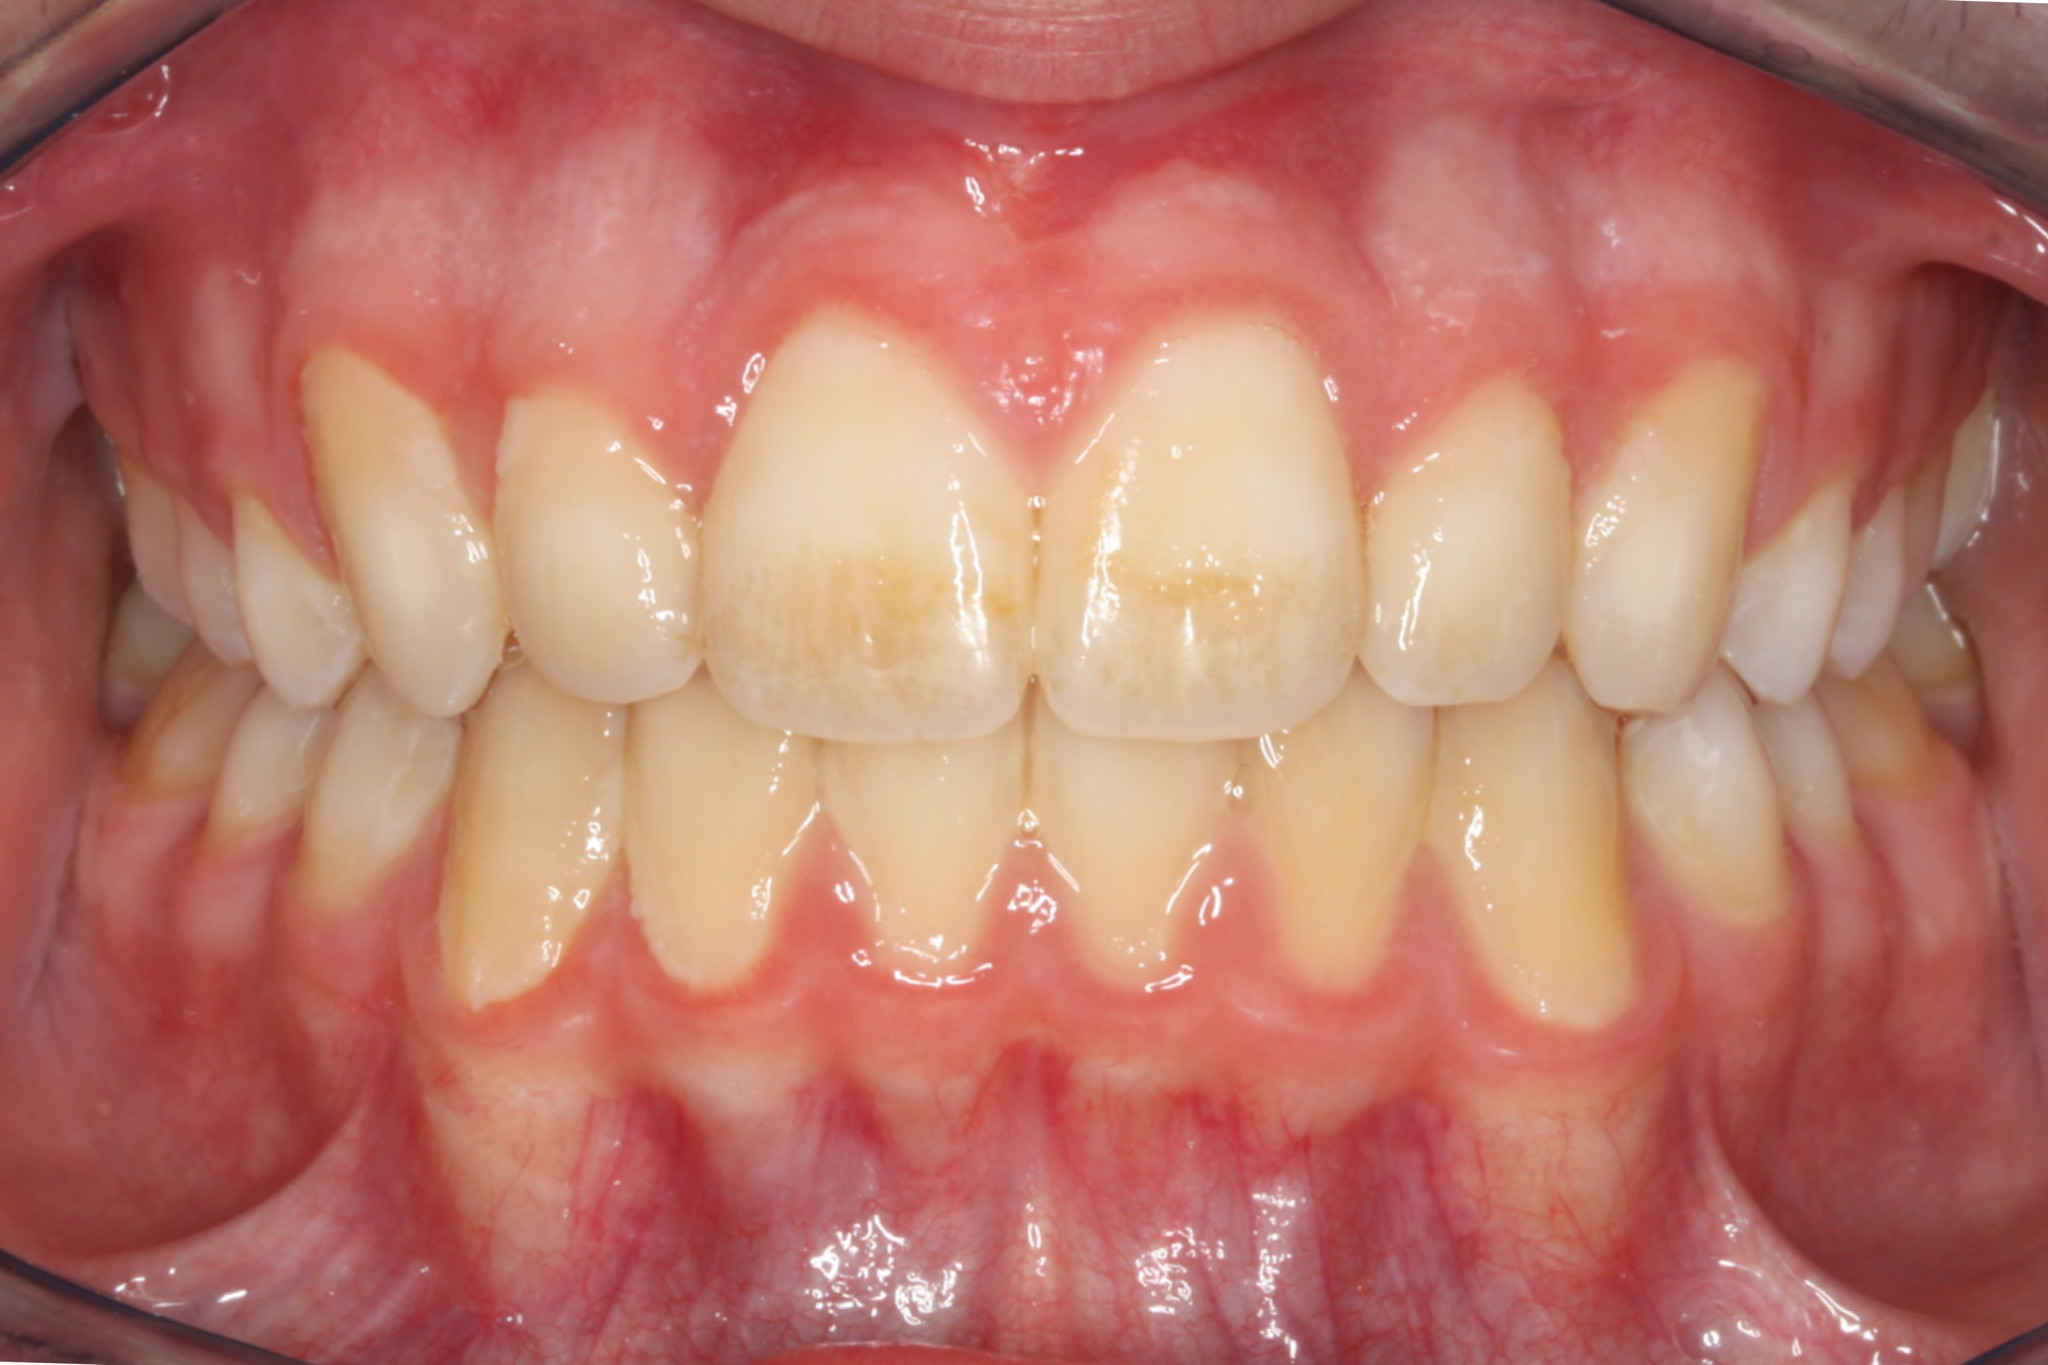 After photo (front view of teeth): Dental Expanders & Braces for Severe Crowding, Case Study #1